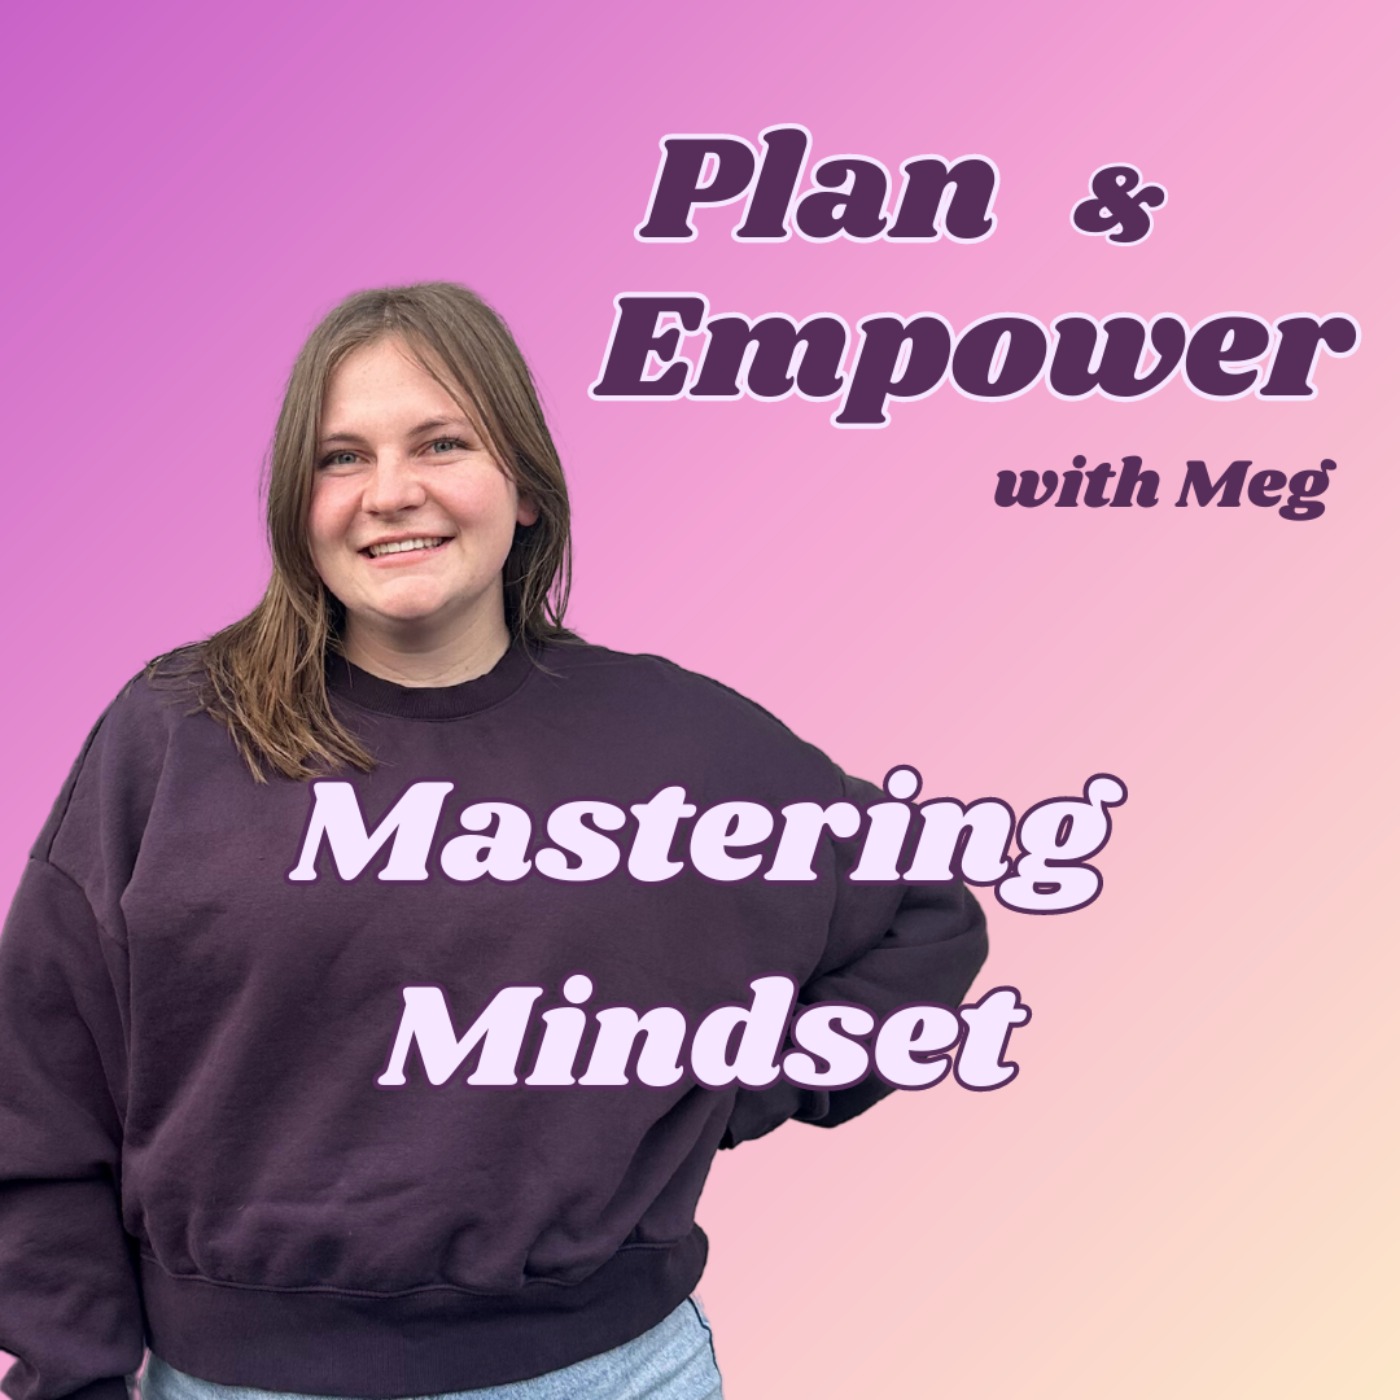 Mastering Mindset: Part 4 - Growth and Momentum